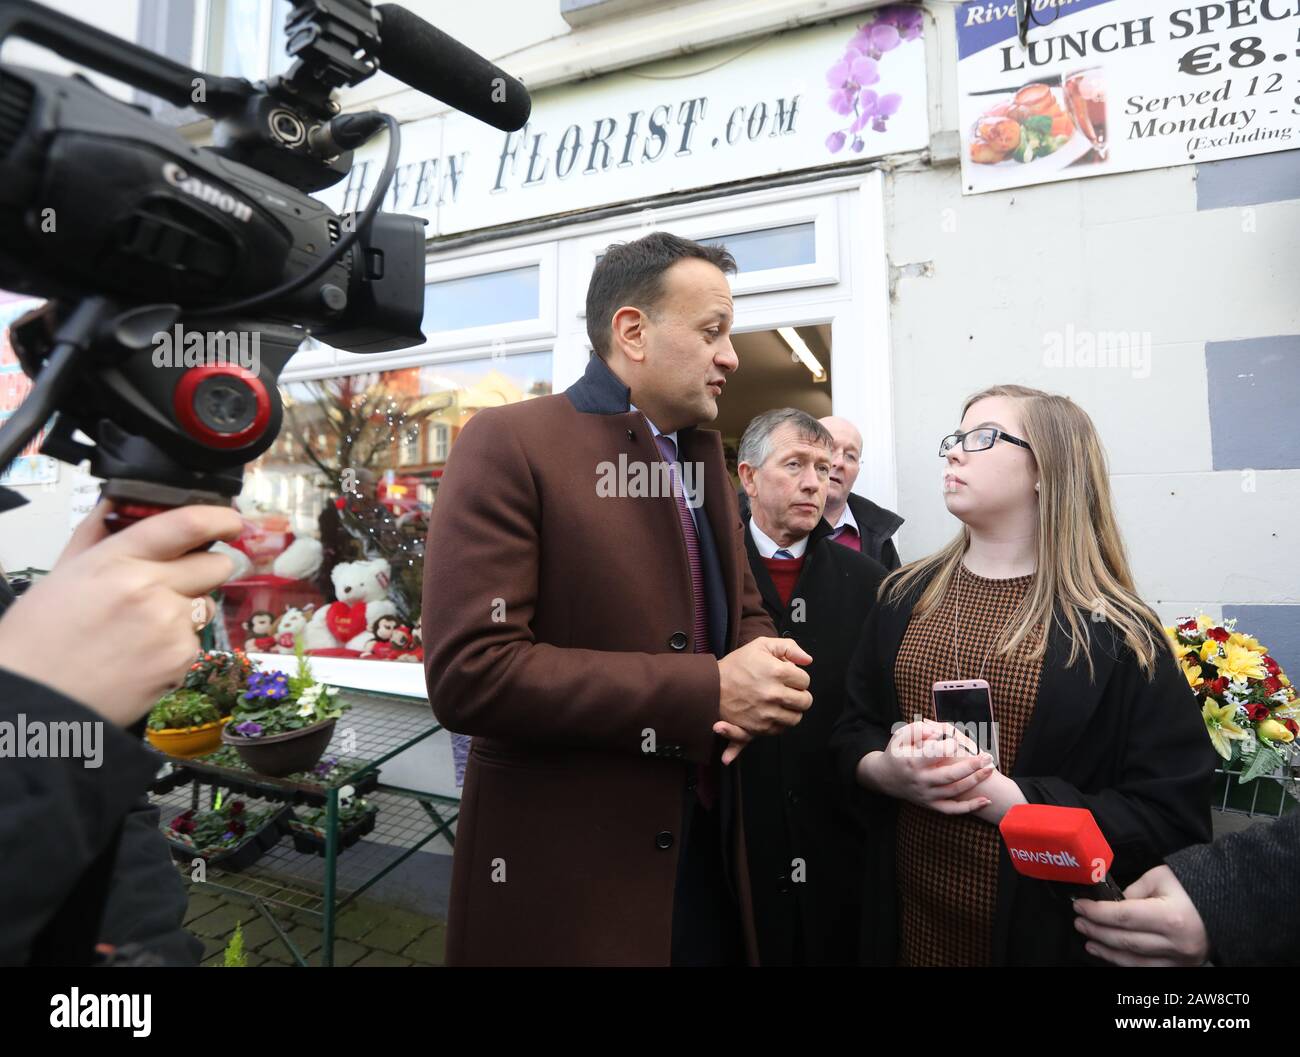 Tullow, Carlow, Ireland. 6/February/2020 General Election2020. Taoiseach and Fine Gael leader Leo Varadkar, responds to questions from 19yr old  Niamh Finn from Carlow, who asked why should she vote Fine Gael, when she casts her first ever vote on Saturday, during a canvass of Tulow in County Carlow.  Photo: Eamonn Farrell/RollingNews.ie/Alamy Live News Stock Photo